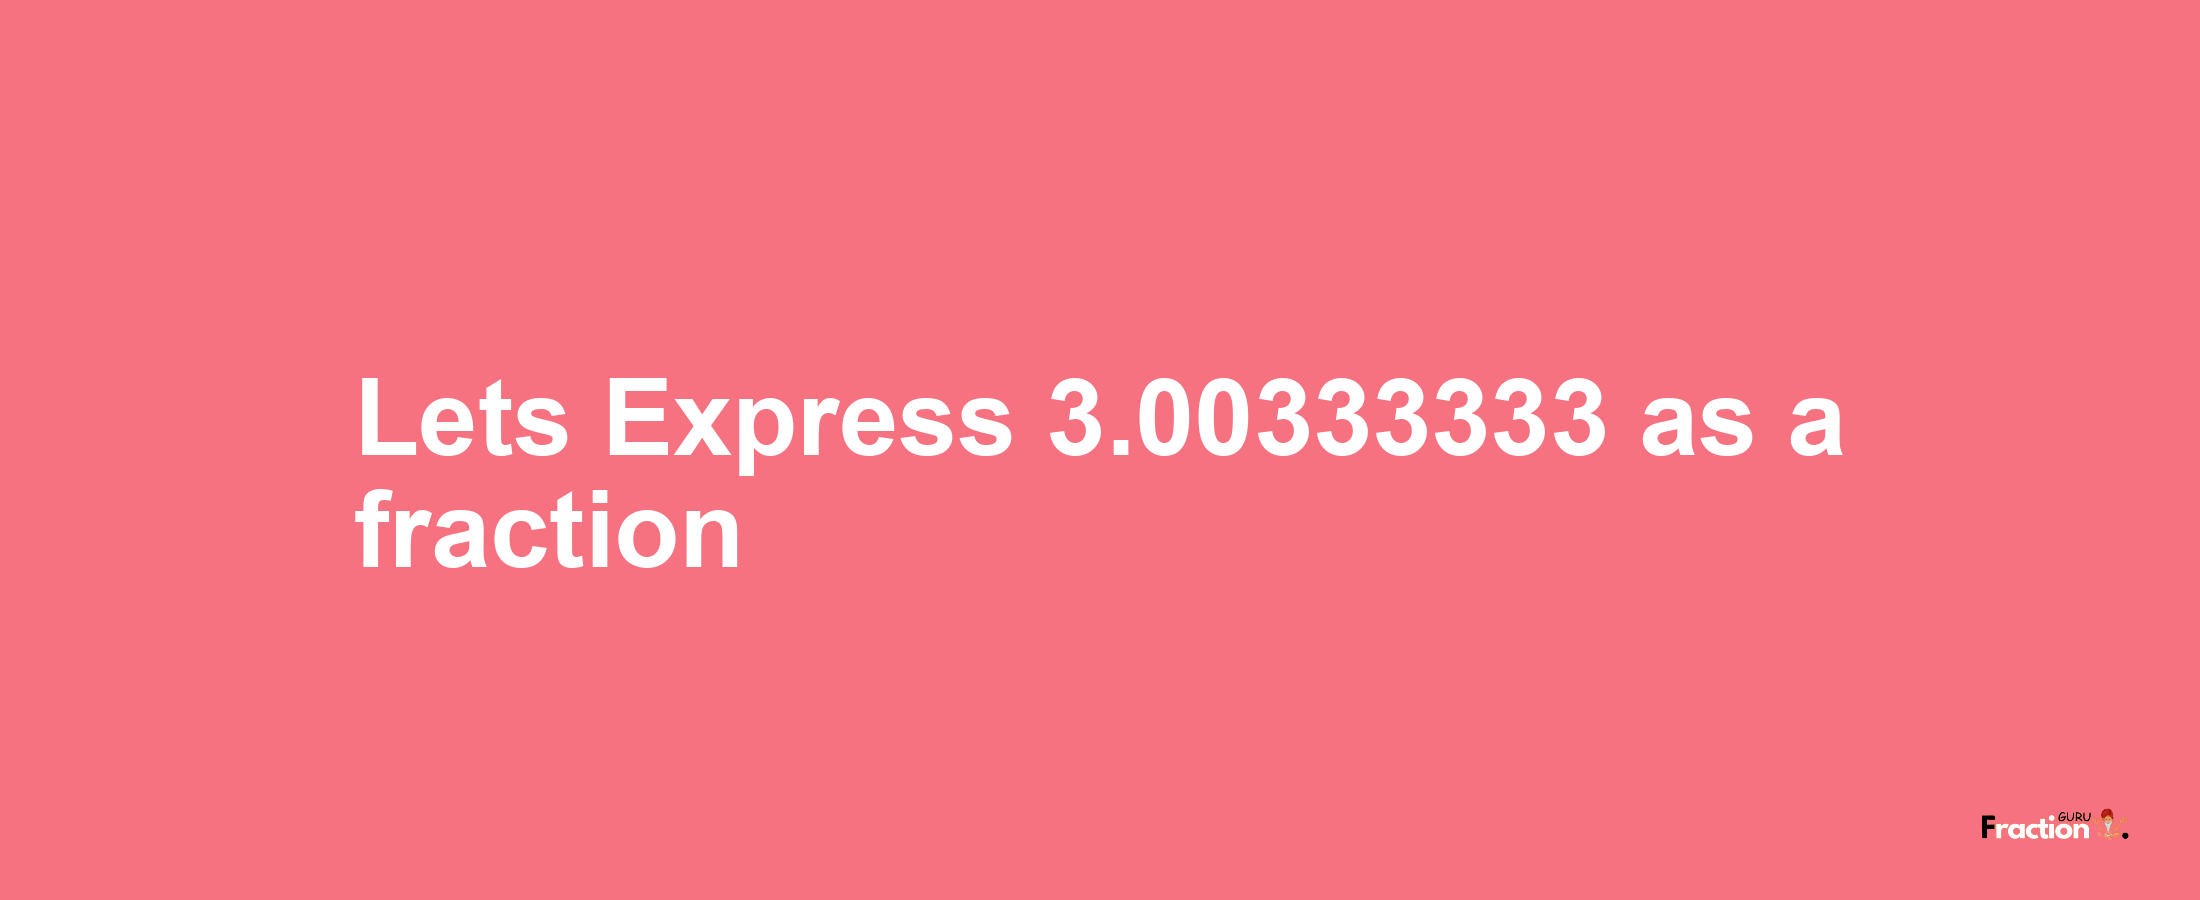 Lets Express 3.00333333 as afraction